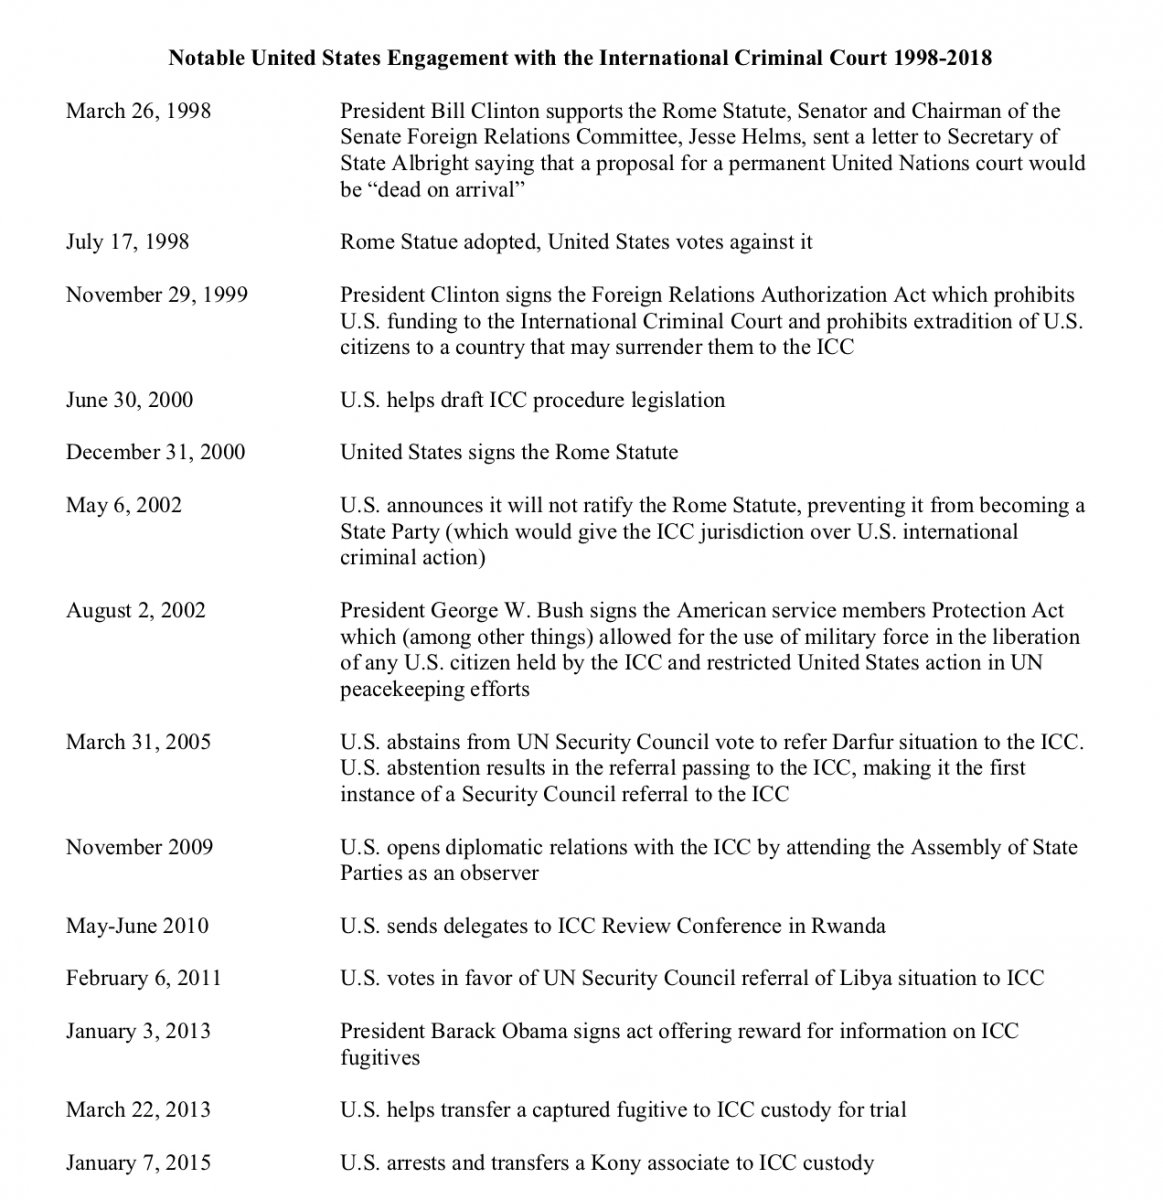 Timeline showing notable U.S. engagement with the International Criminal Court between 1998 and 2018.